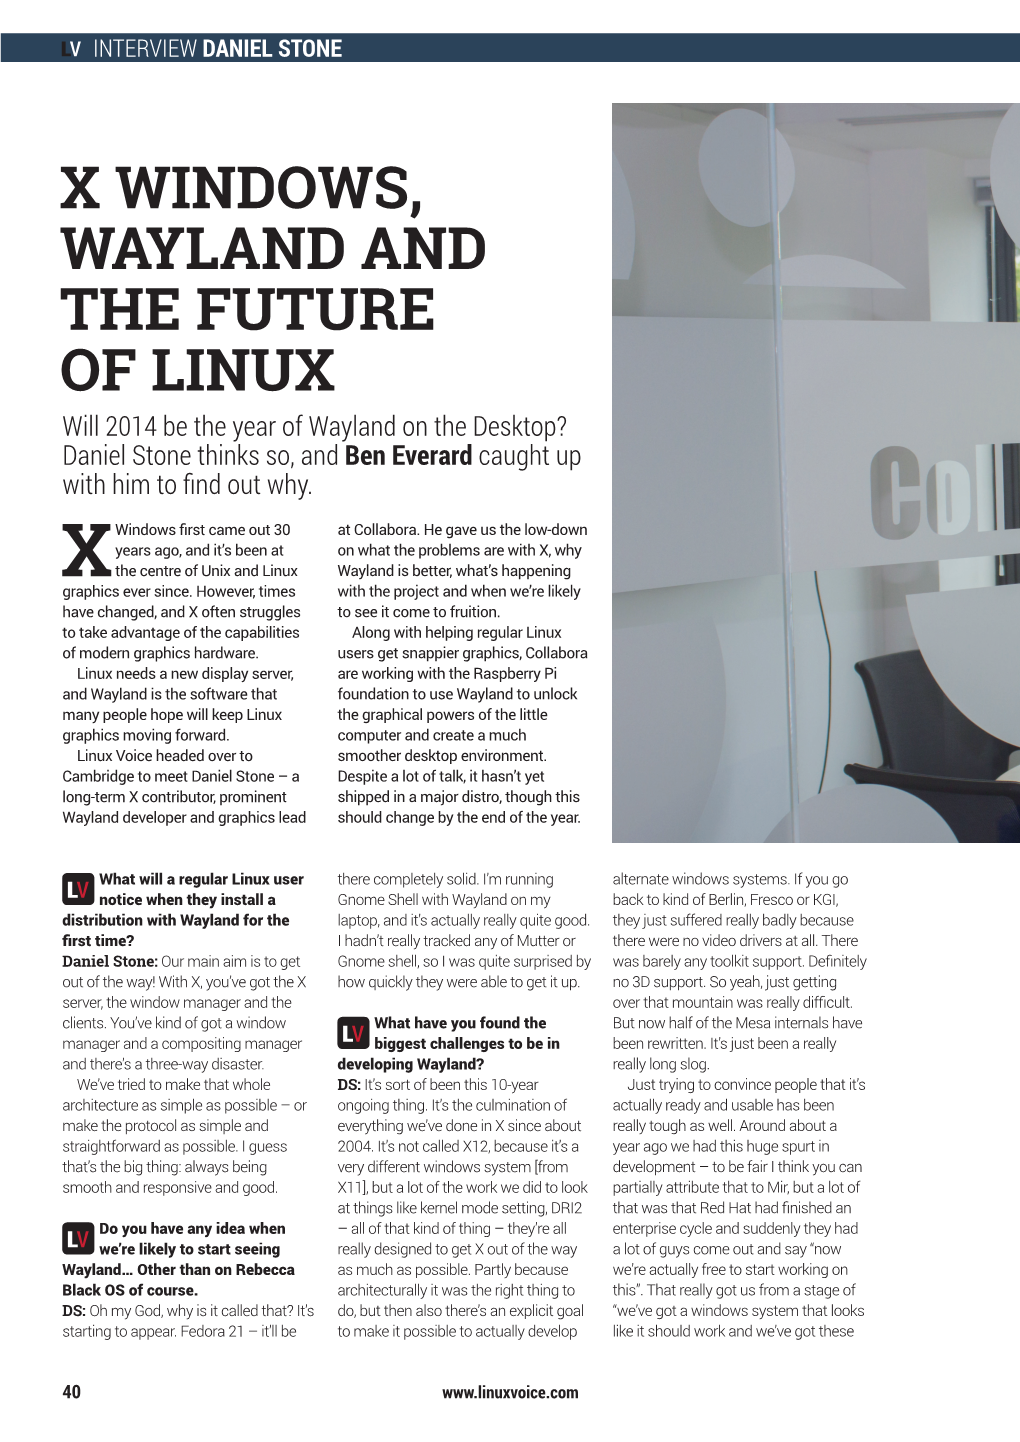 X WINDOWS, WAYLAND and the FUTURE of LINUX Will 2014 Be the Year of Wayland on the Desktop? Daniel Stone Thinks So, and Ben Everard Caught up with Him to Find out Why